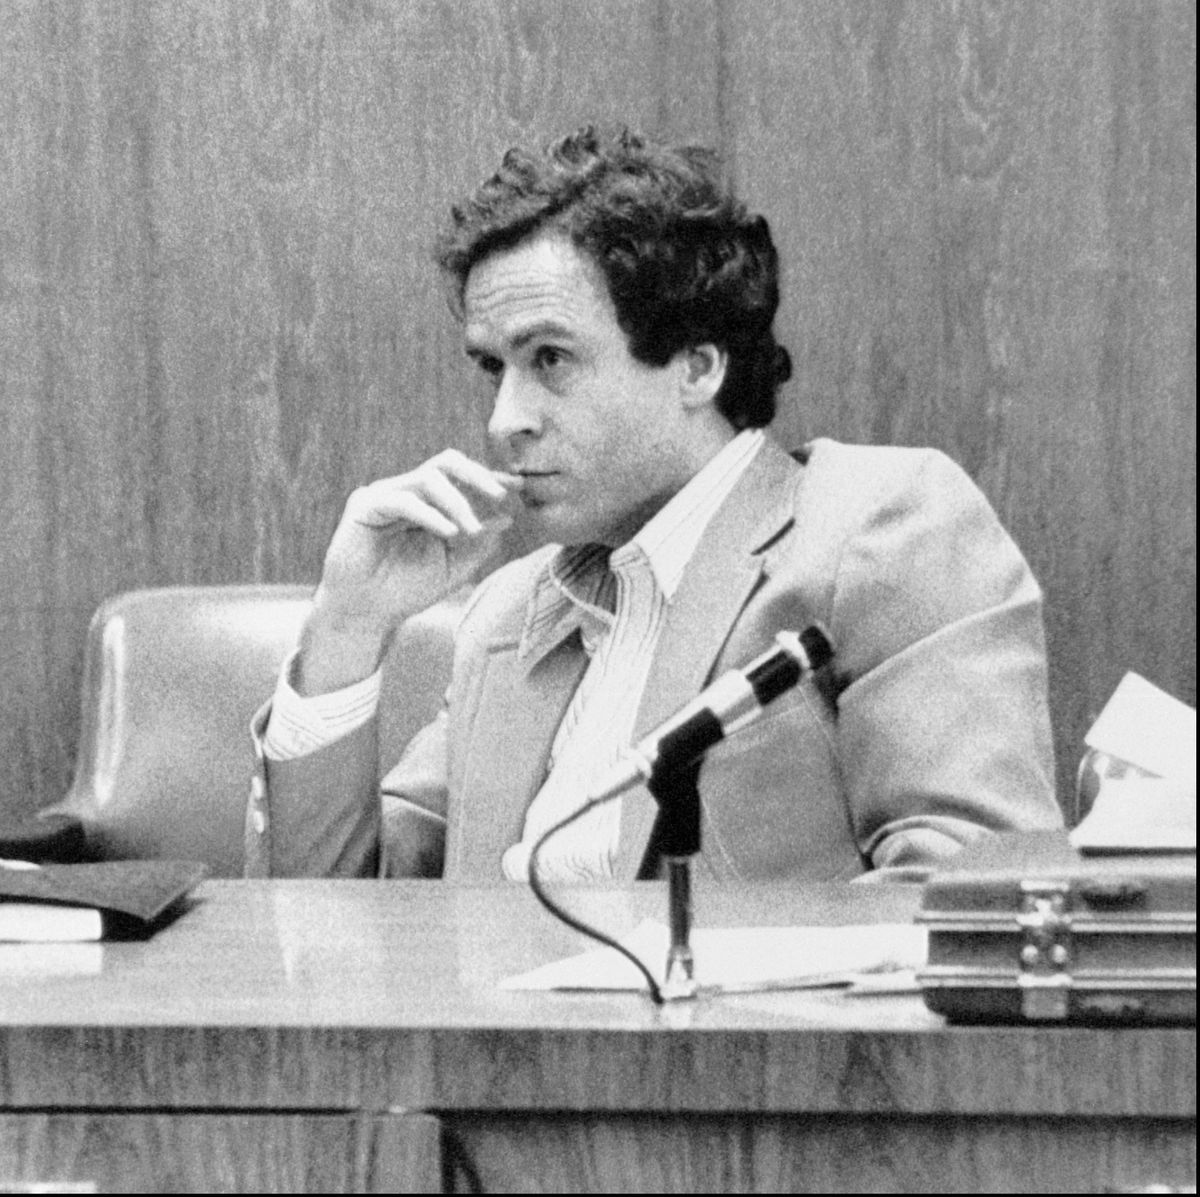 Ted Bundy in Court